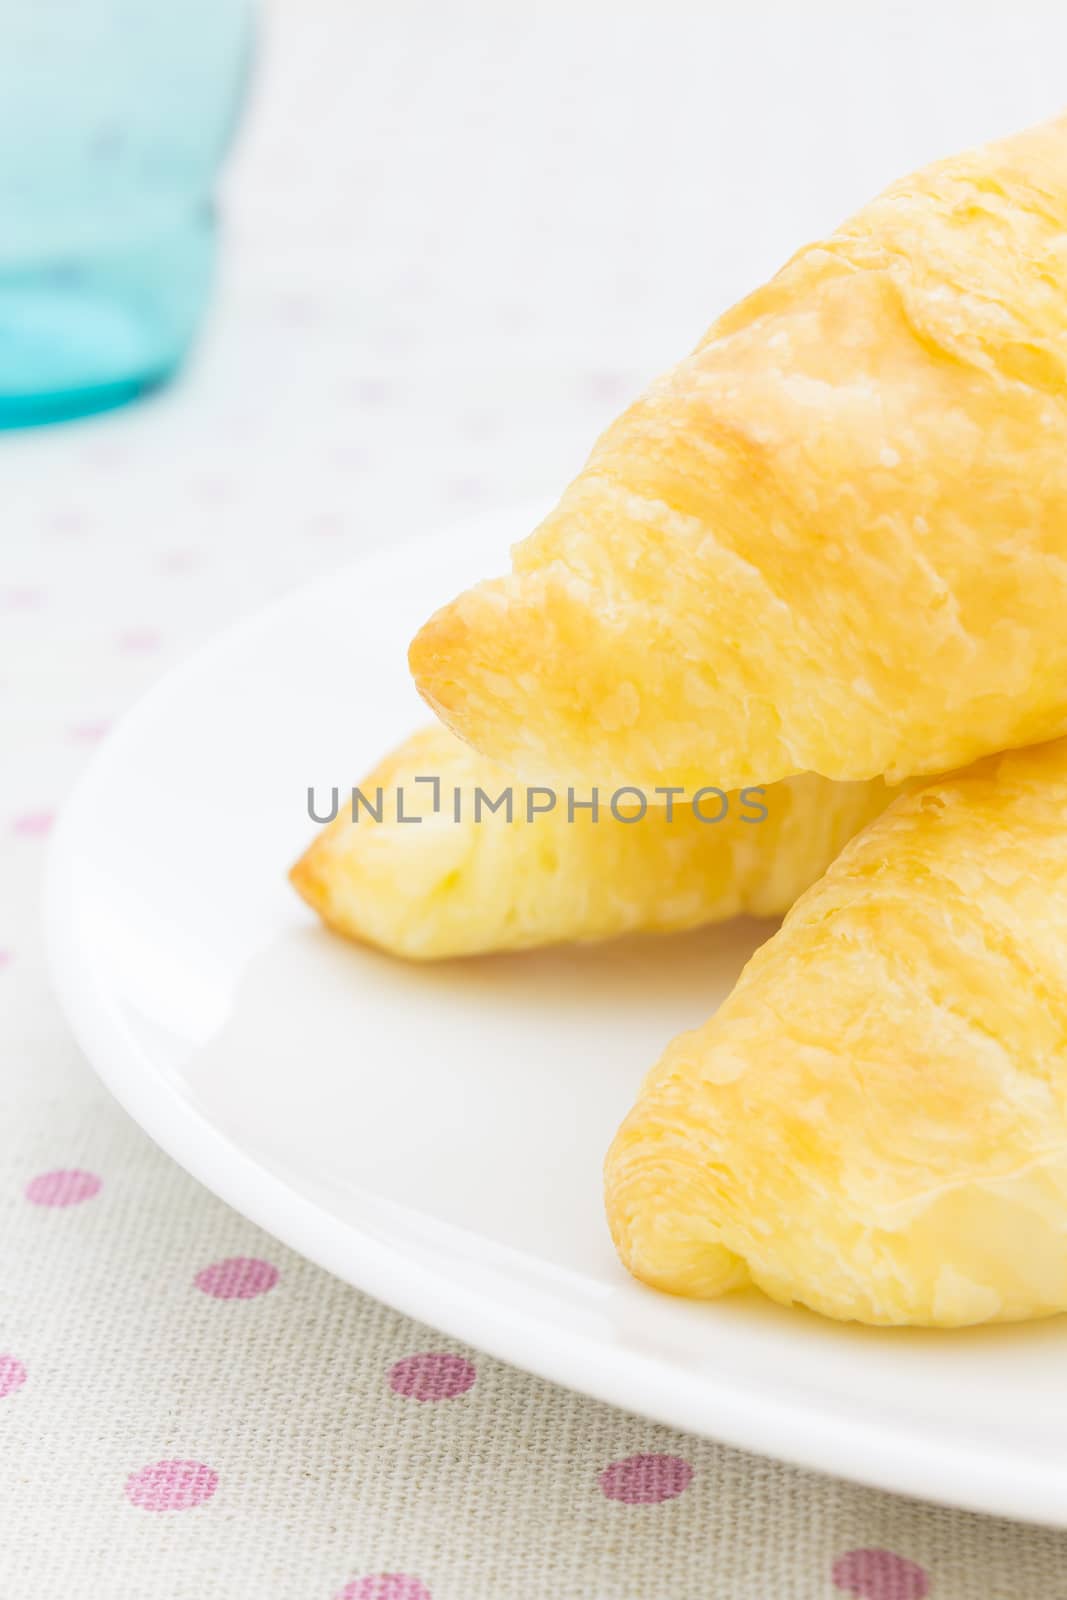 Croissant or bread or bakery on white dish on pink point placemat with glass close up view